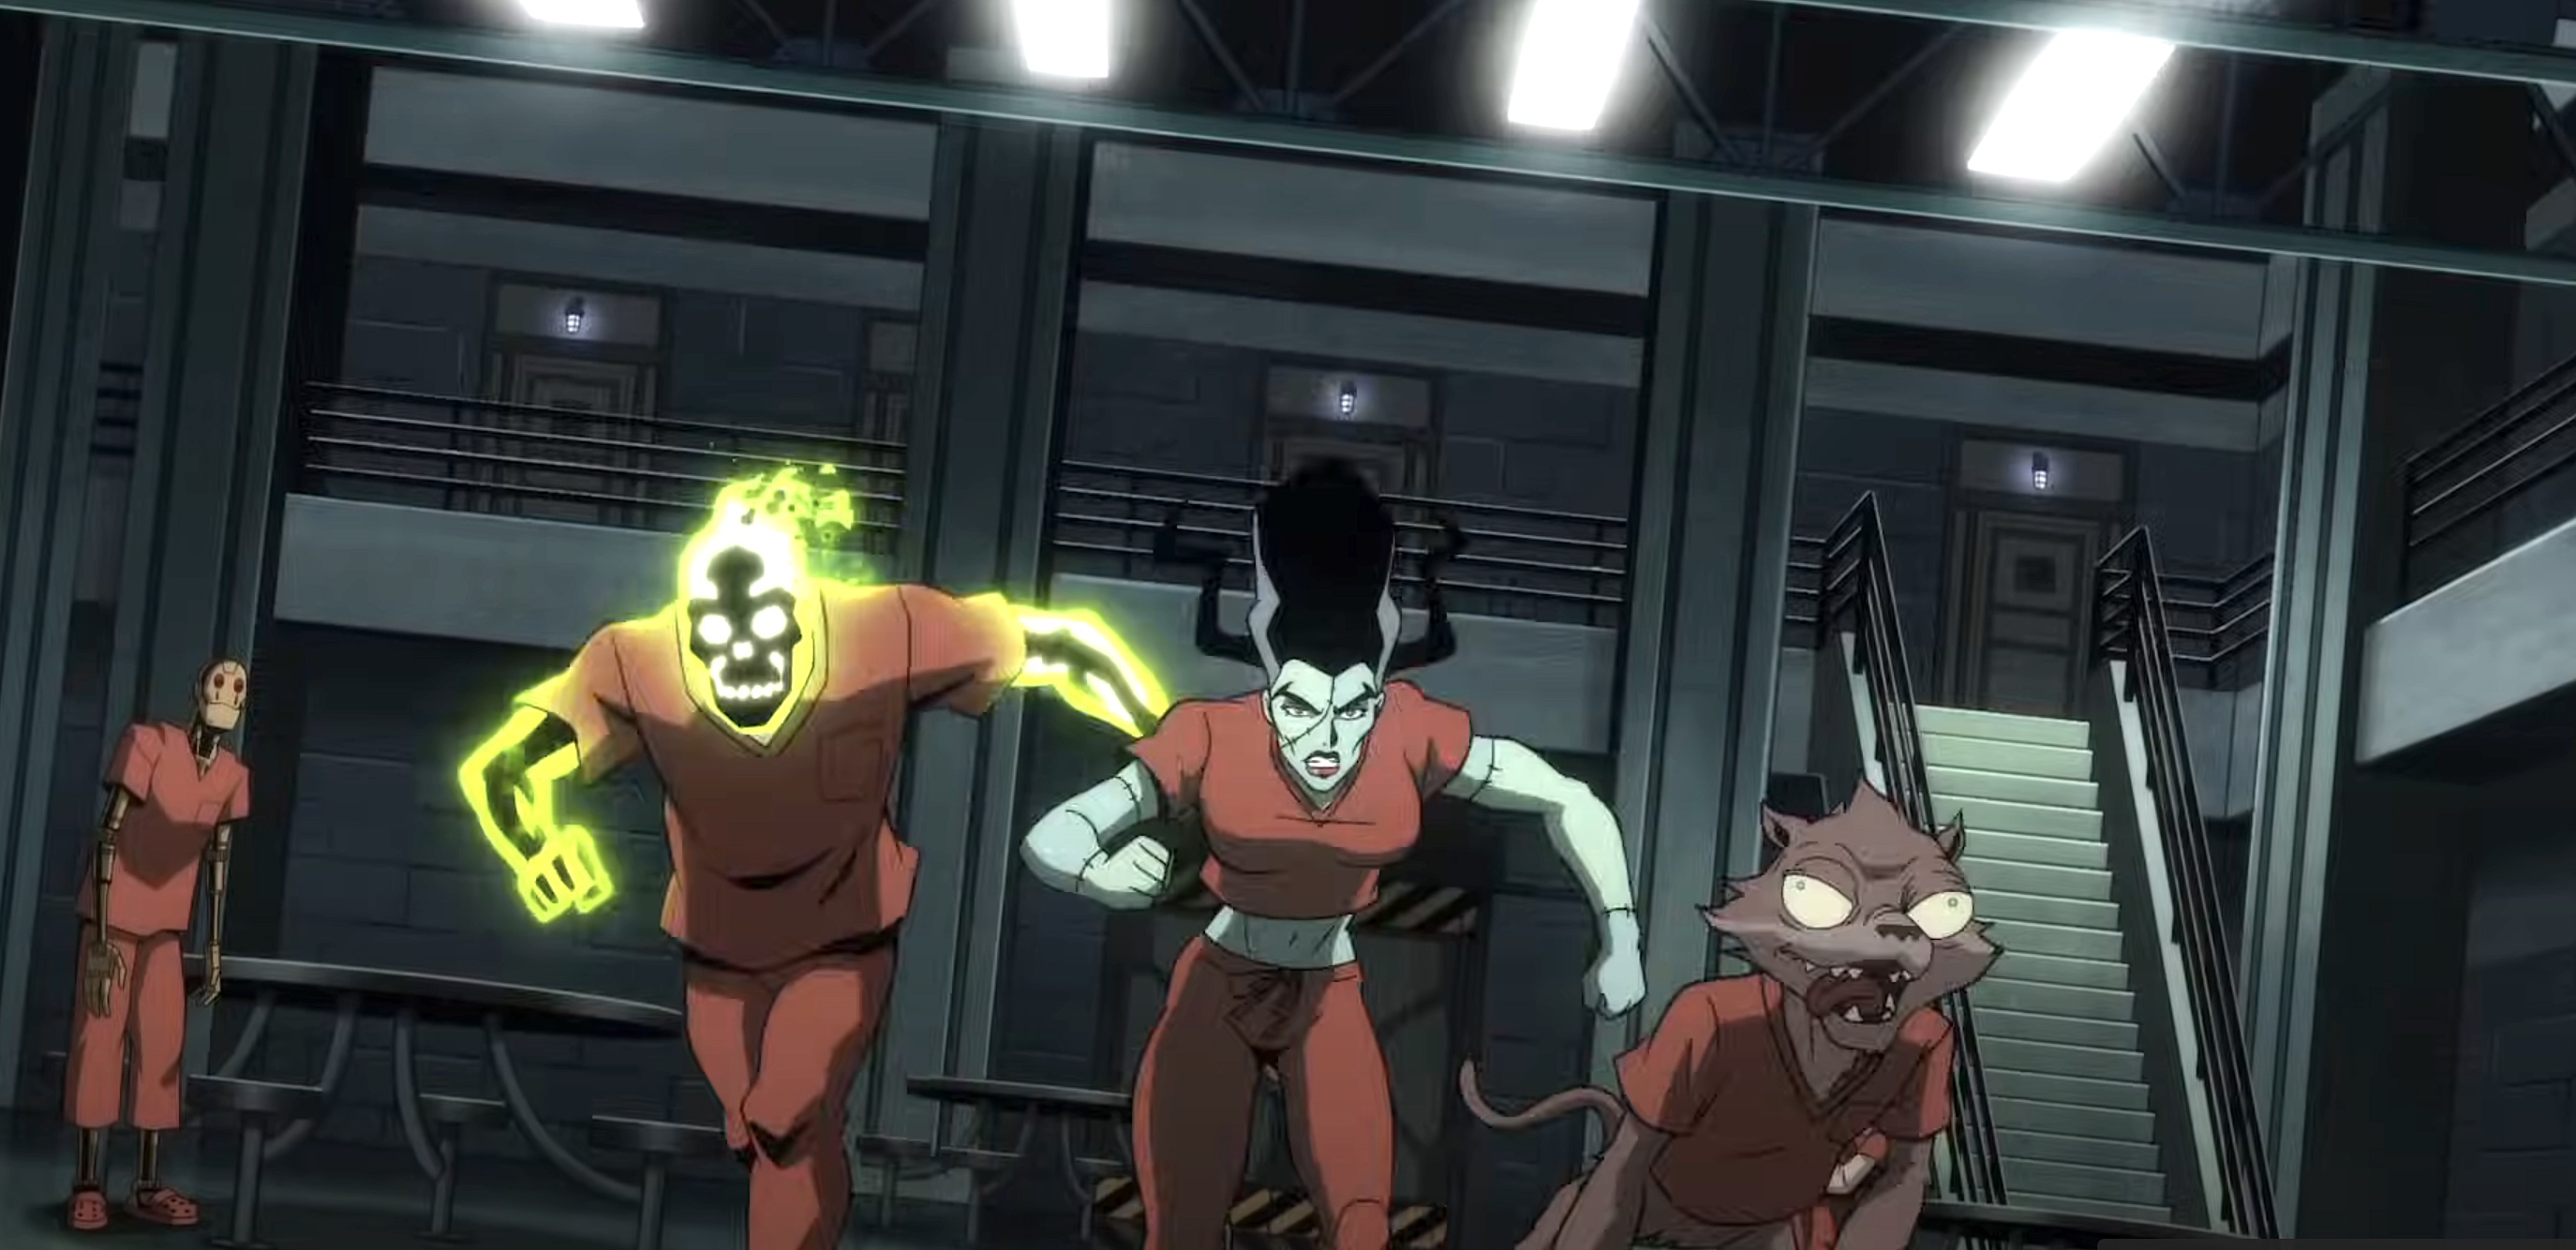 Doctor Phosphorus, Bride of Frankenstein, and Weasel, all wearing orange prison jumpsuits, rush at the screen as G.I. Robot, in a matching jumpsuit, stands curiously behind them in the first trailer for James Gunn’s Creature Commandos